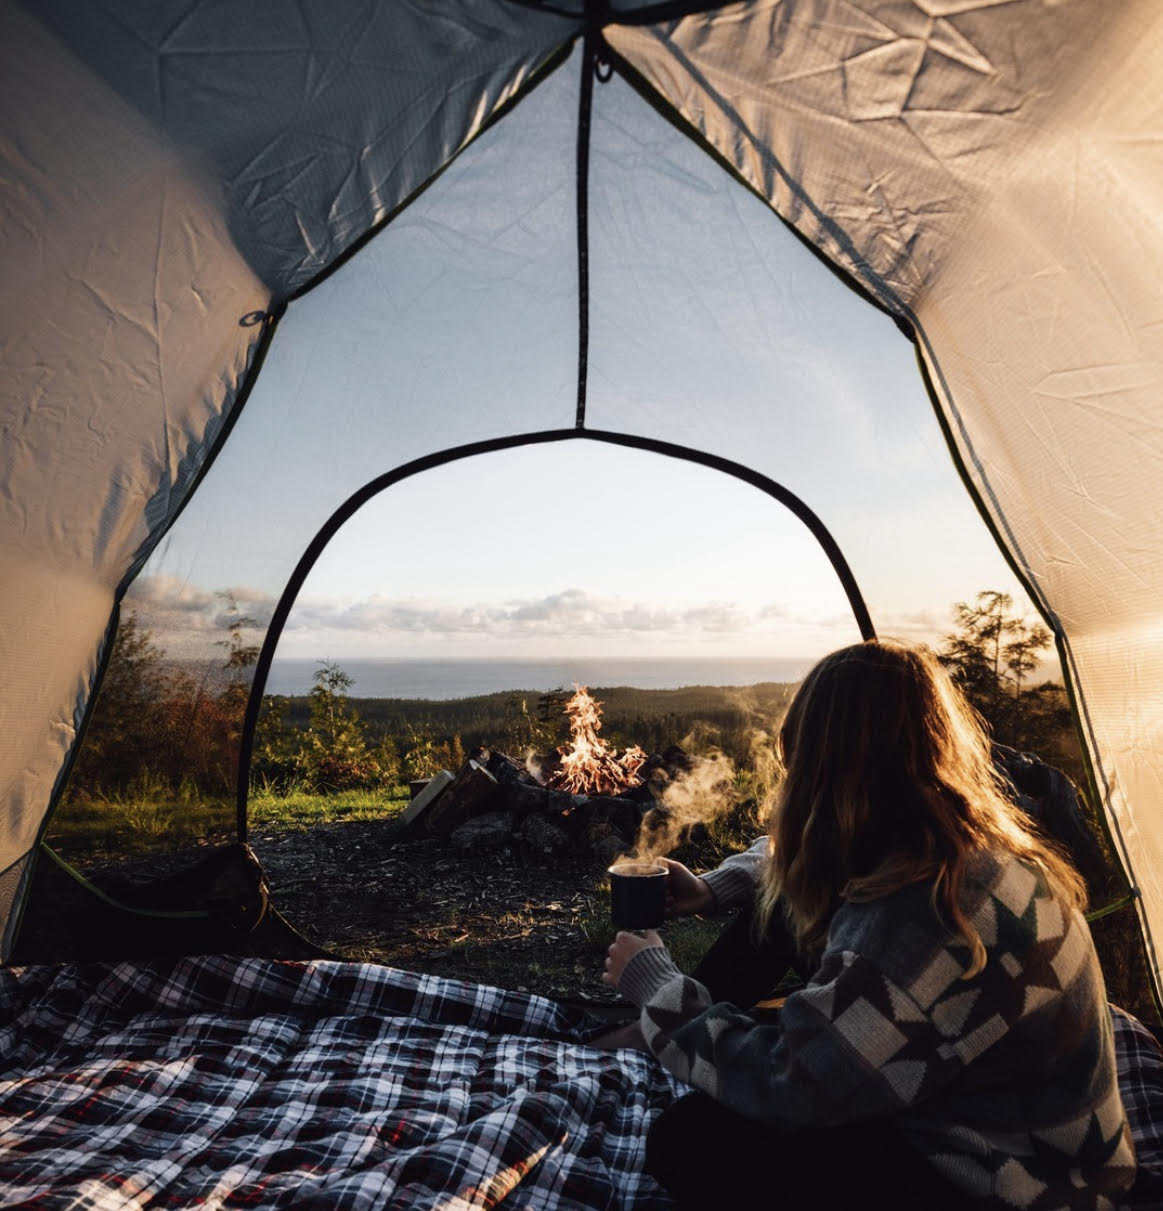 Renting Camping Gear: The Pros, Cons, Tips & Tricks